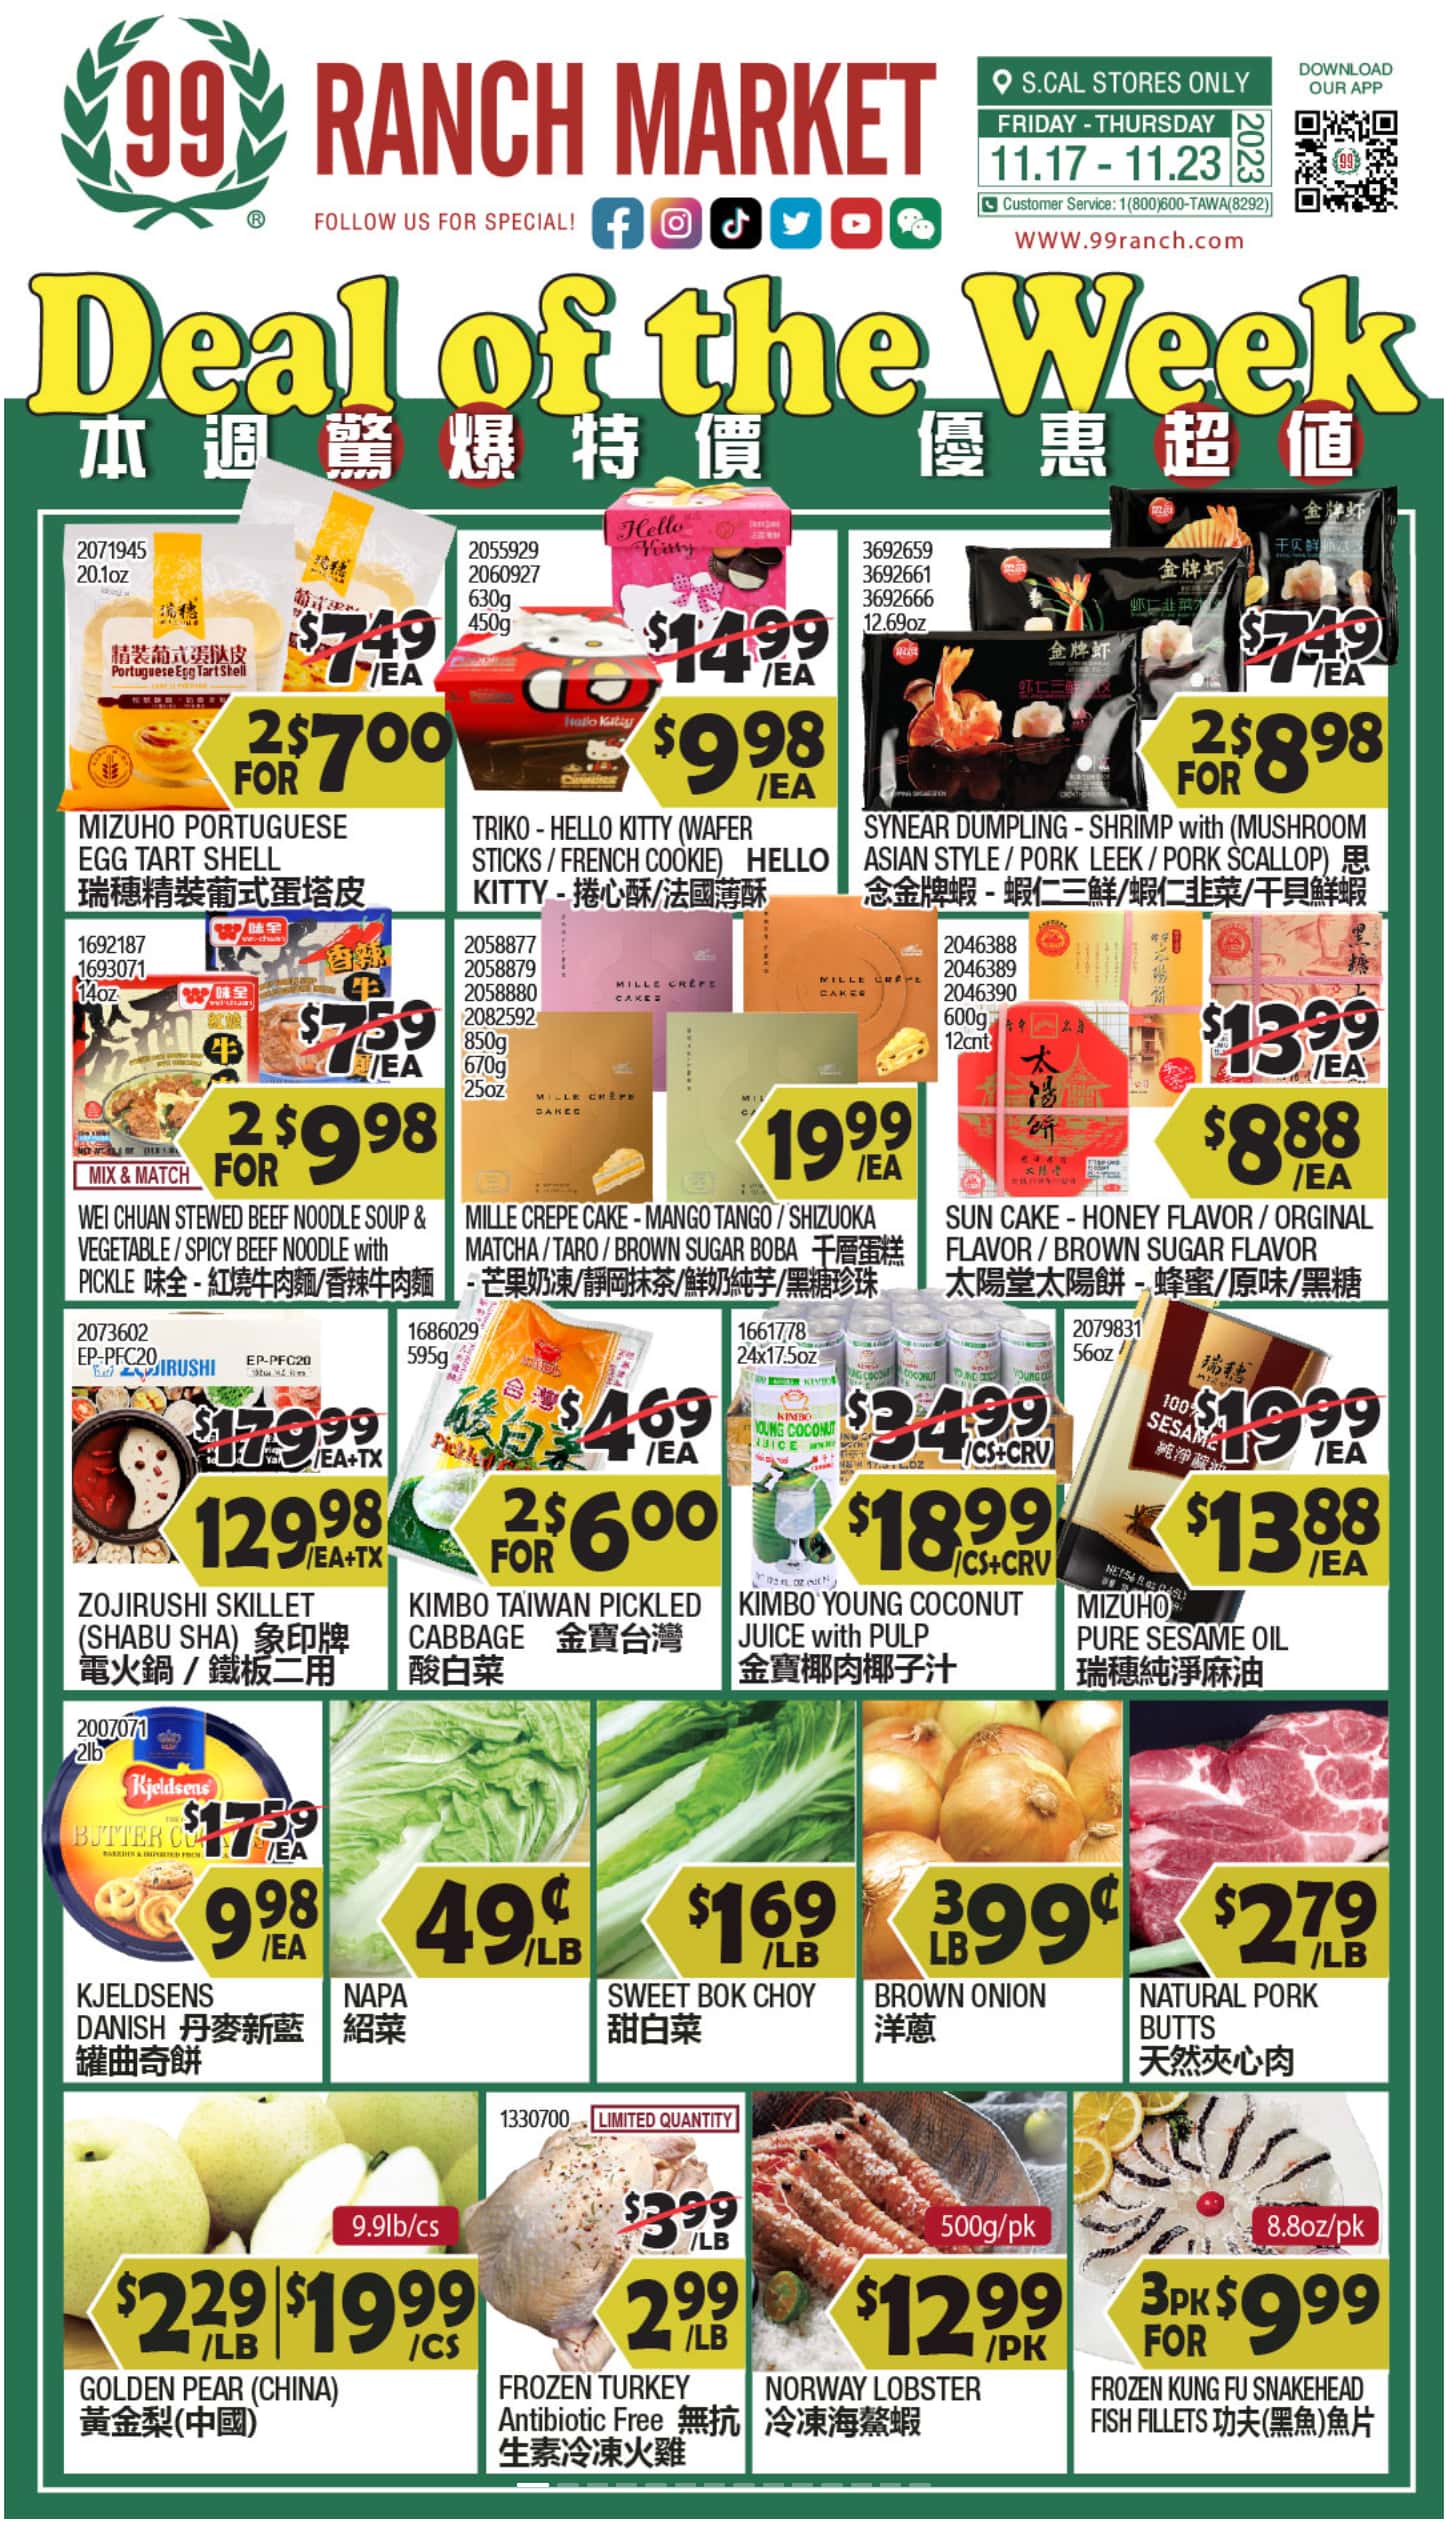 99 Ranch Market Weekly Ad December 8 to December 14, 2023 1 – 99 ranch ad 1 1